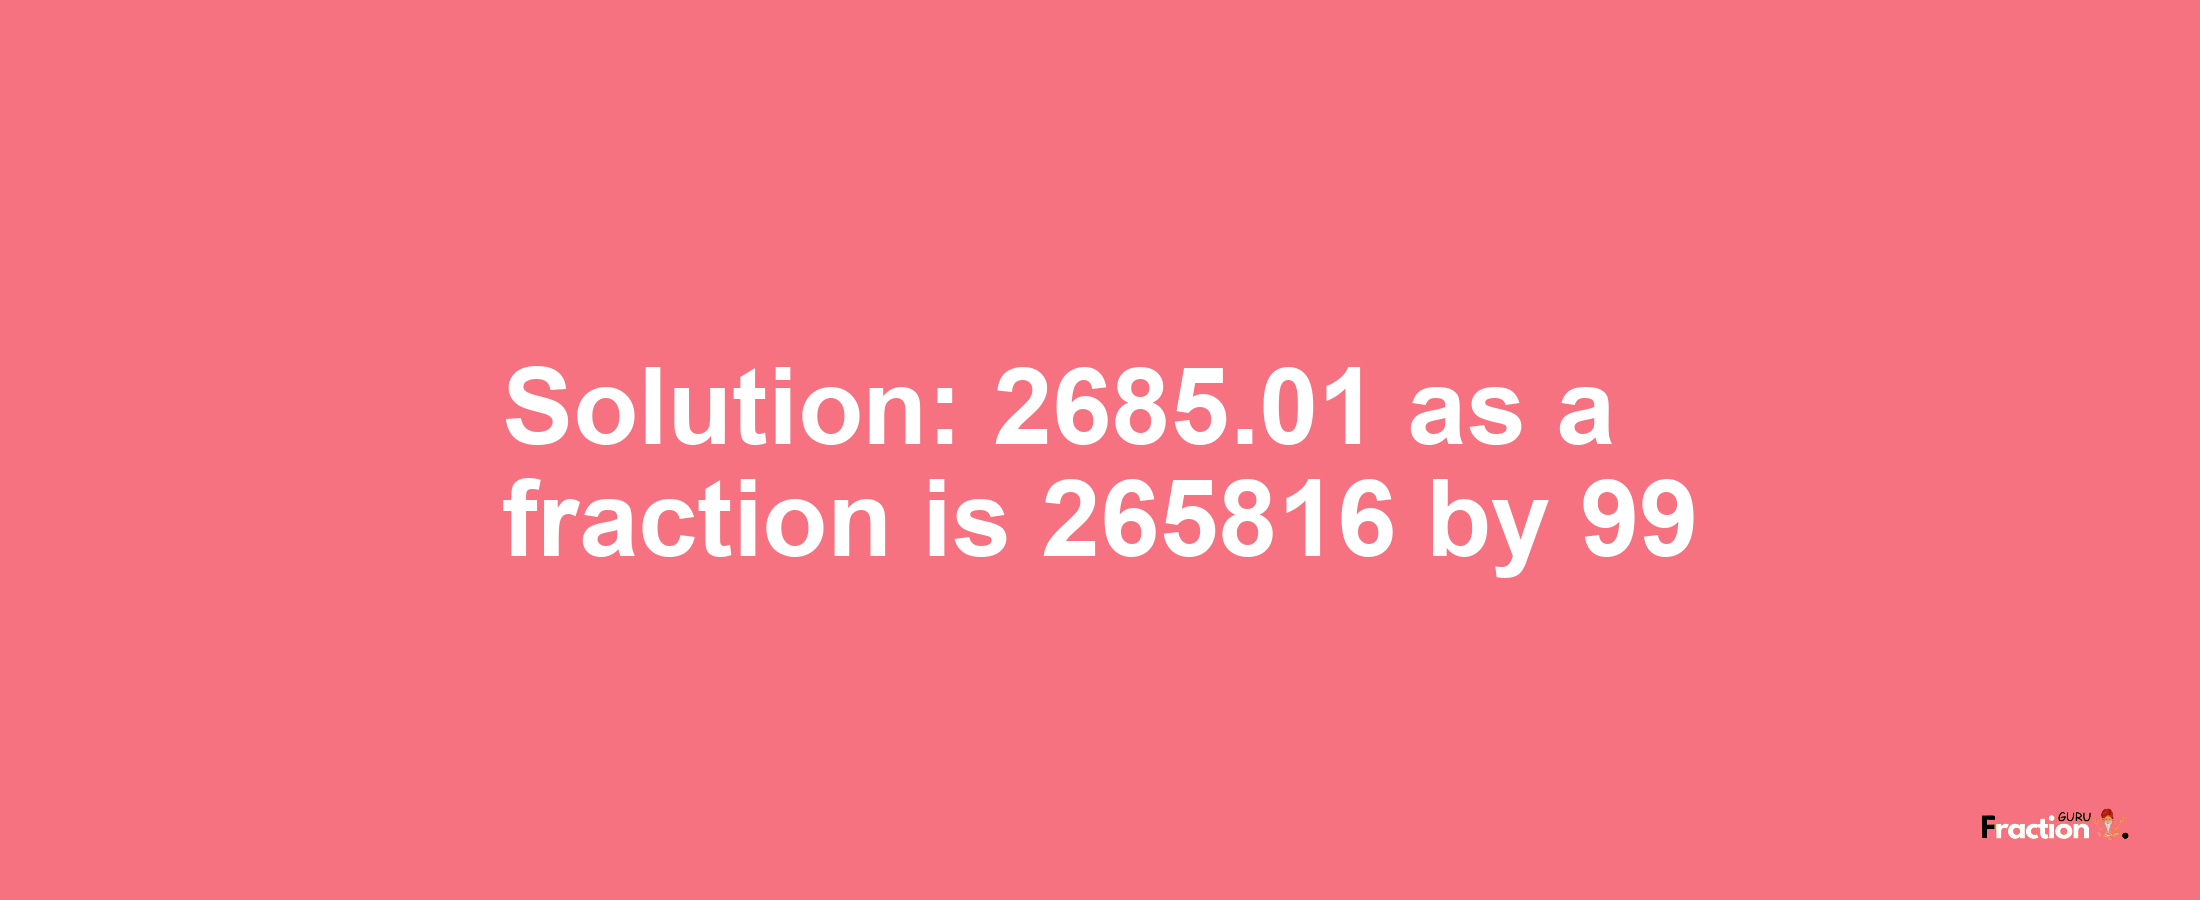 Solution:2685.01 as a fraction is 265816/99